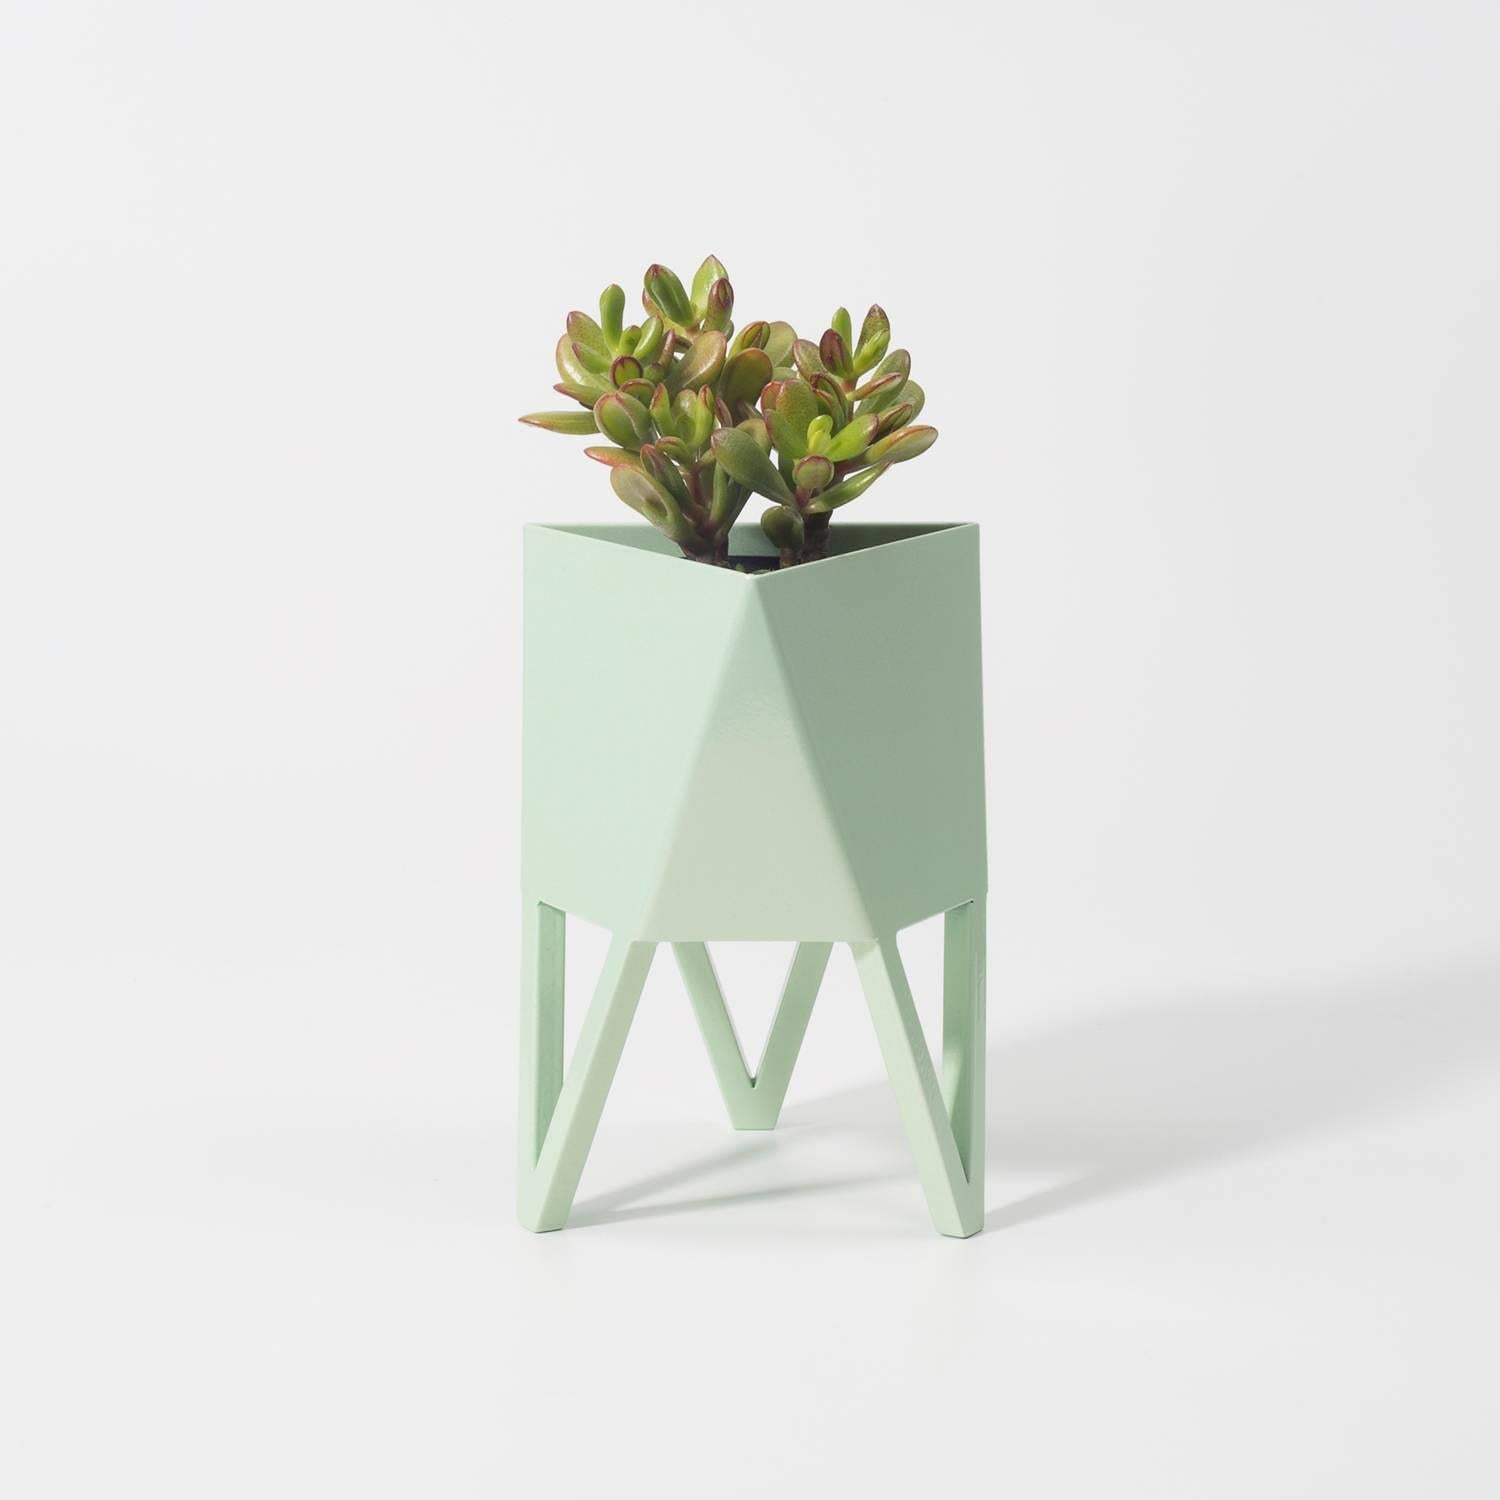 Contemporary Deca Planter in Light Pink Steel, Small, by Force/Collide